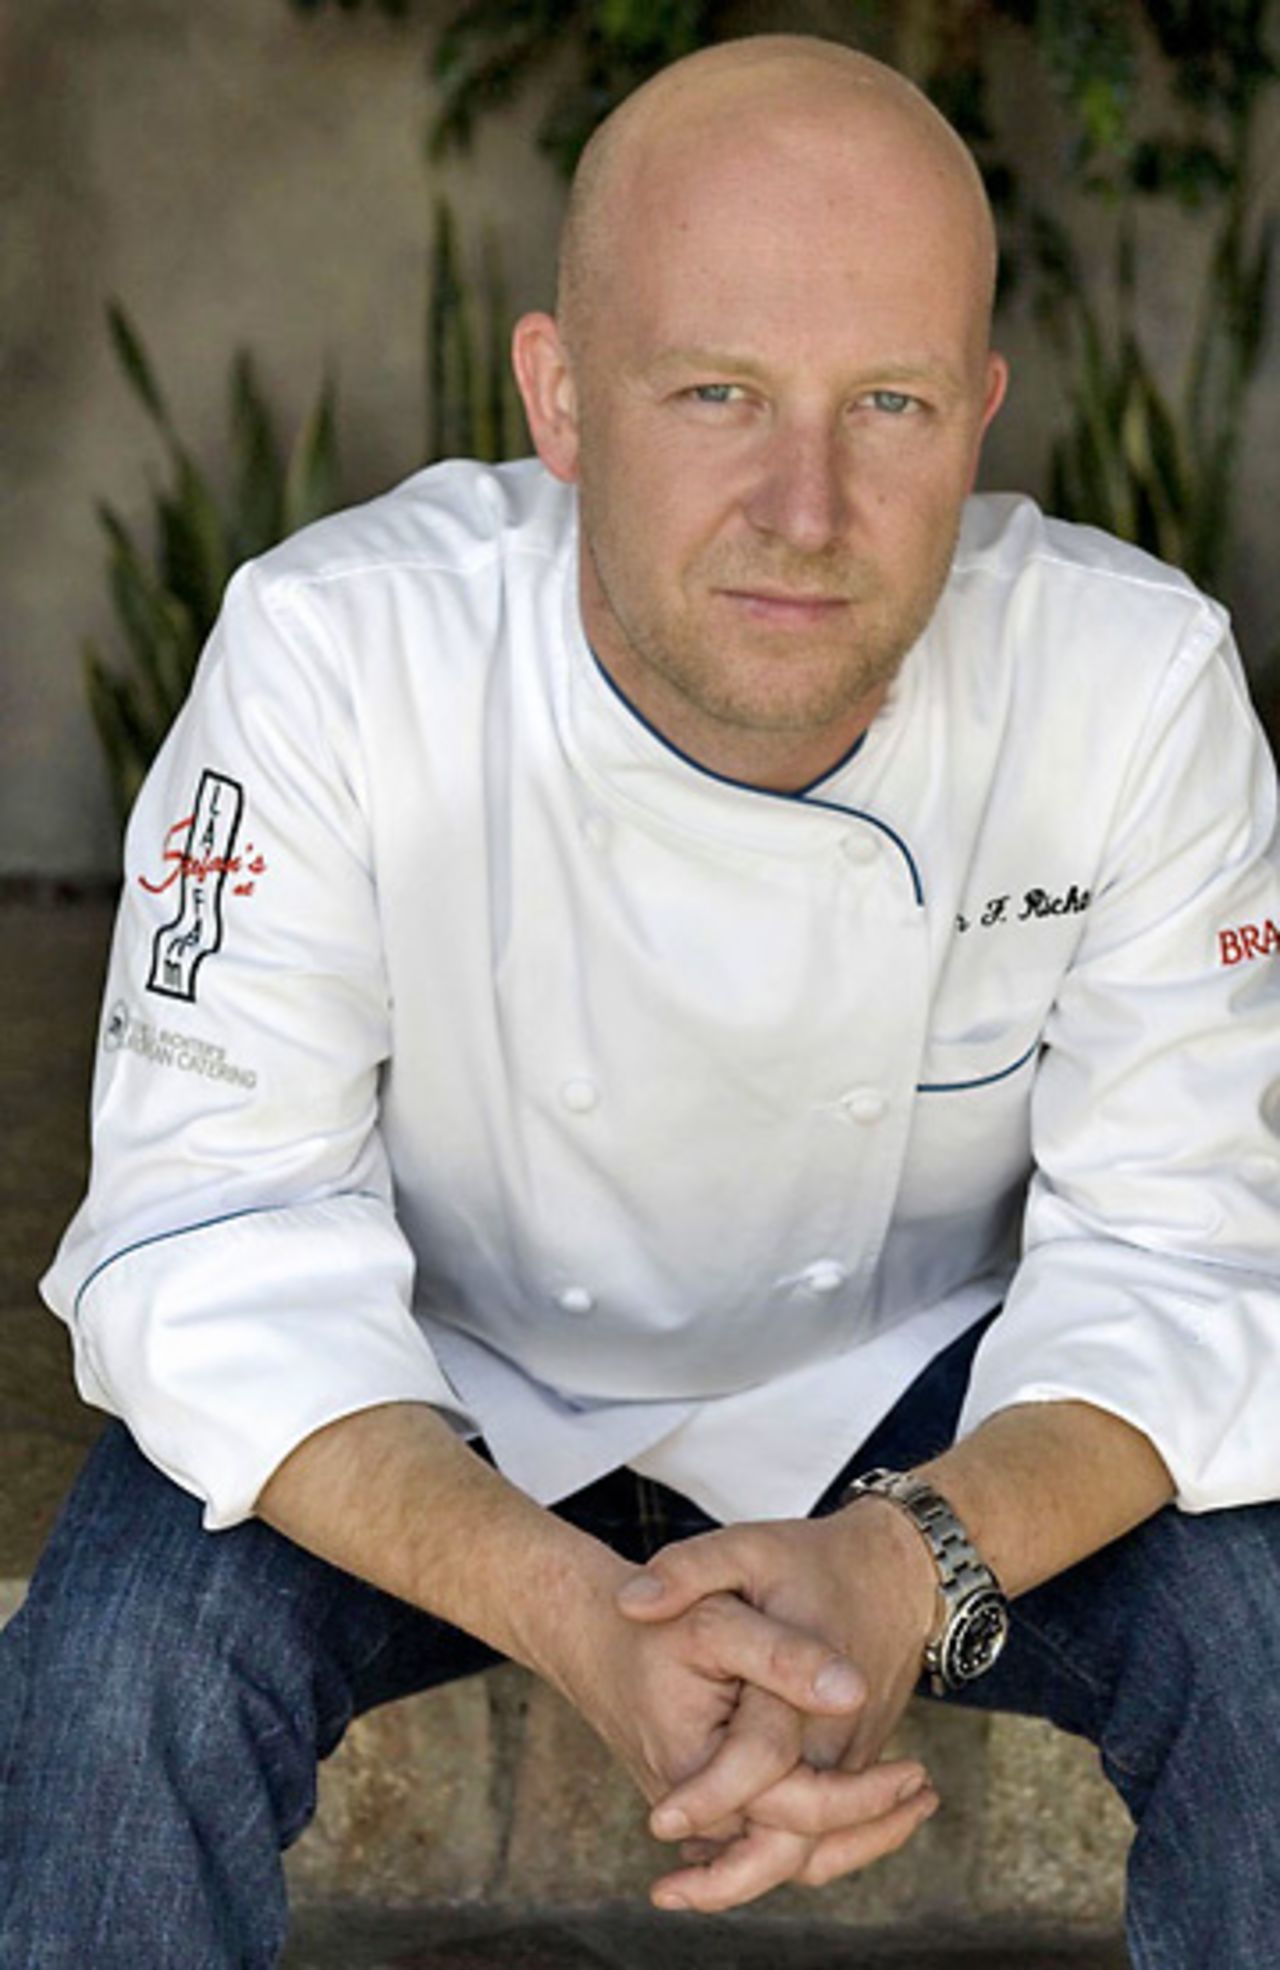 Stefan Richter, 41, was runner-up on Top Chef season 5 and returned as a competitor to the show for season 10.